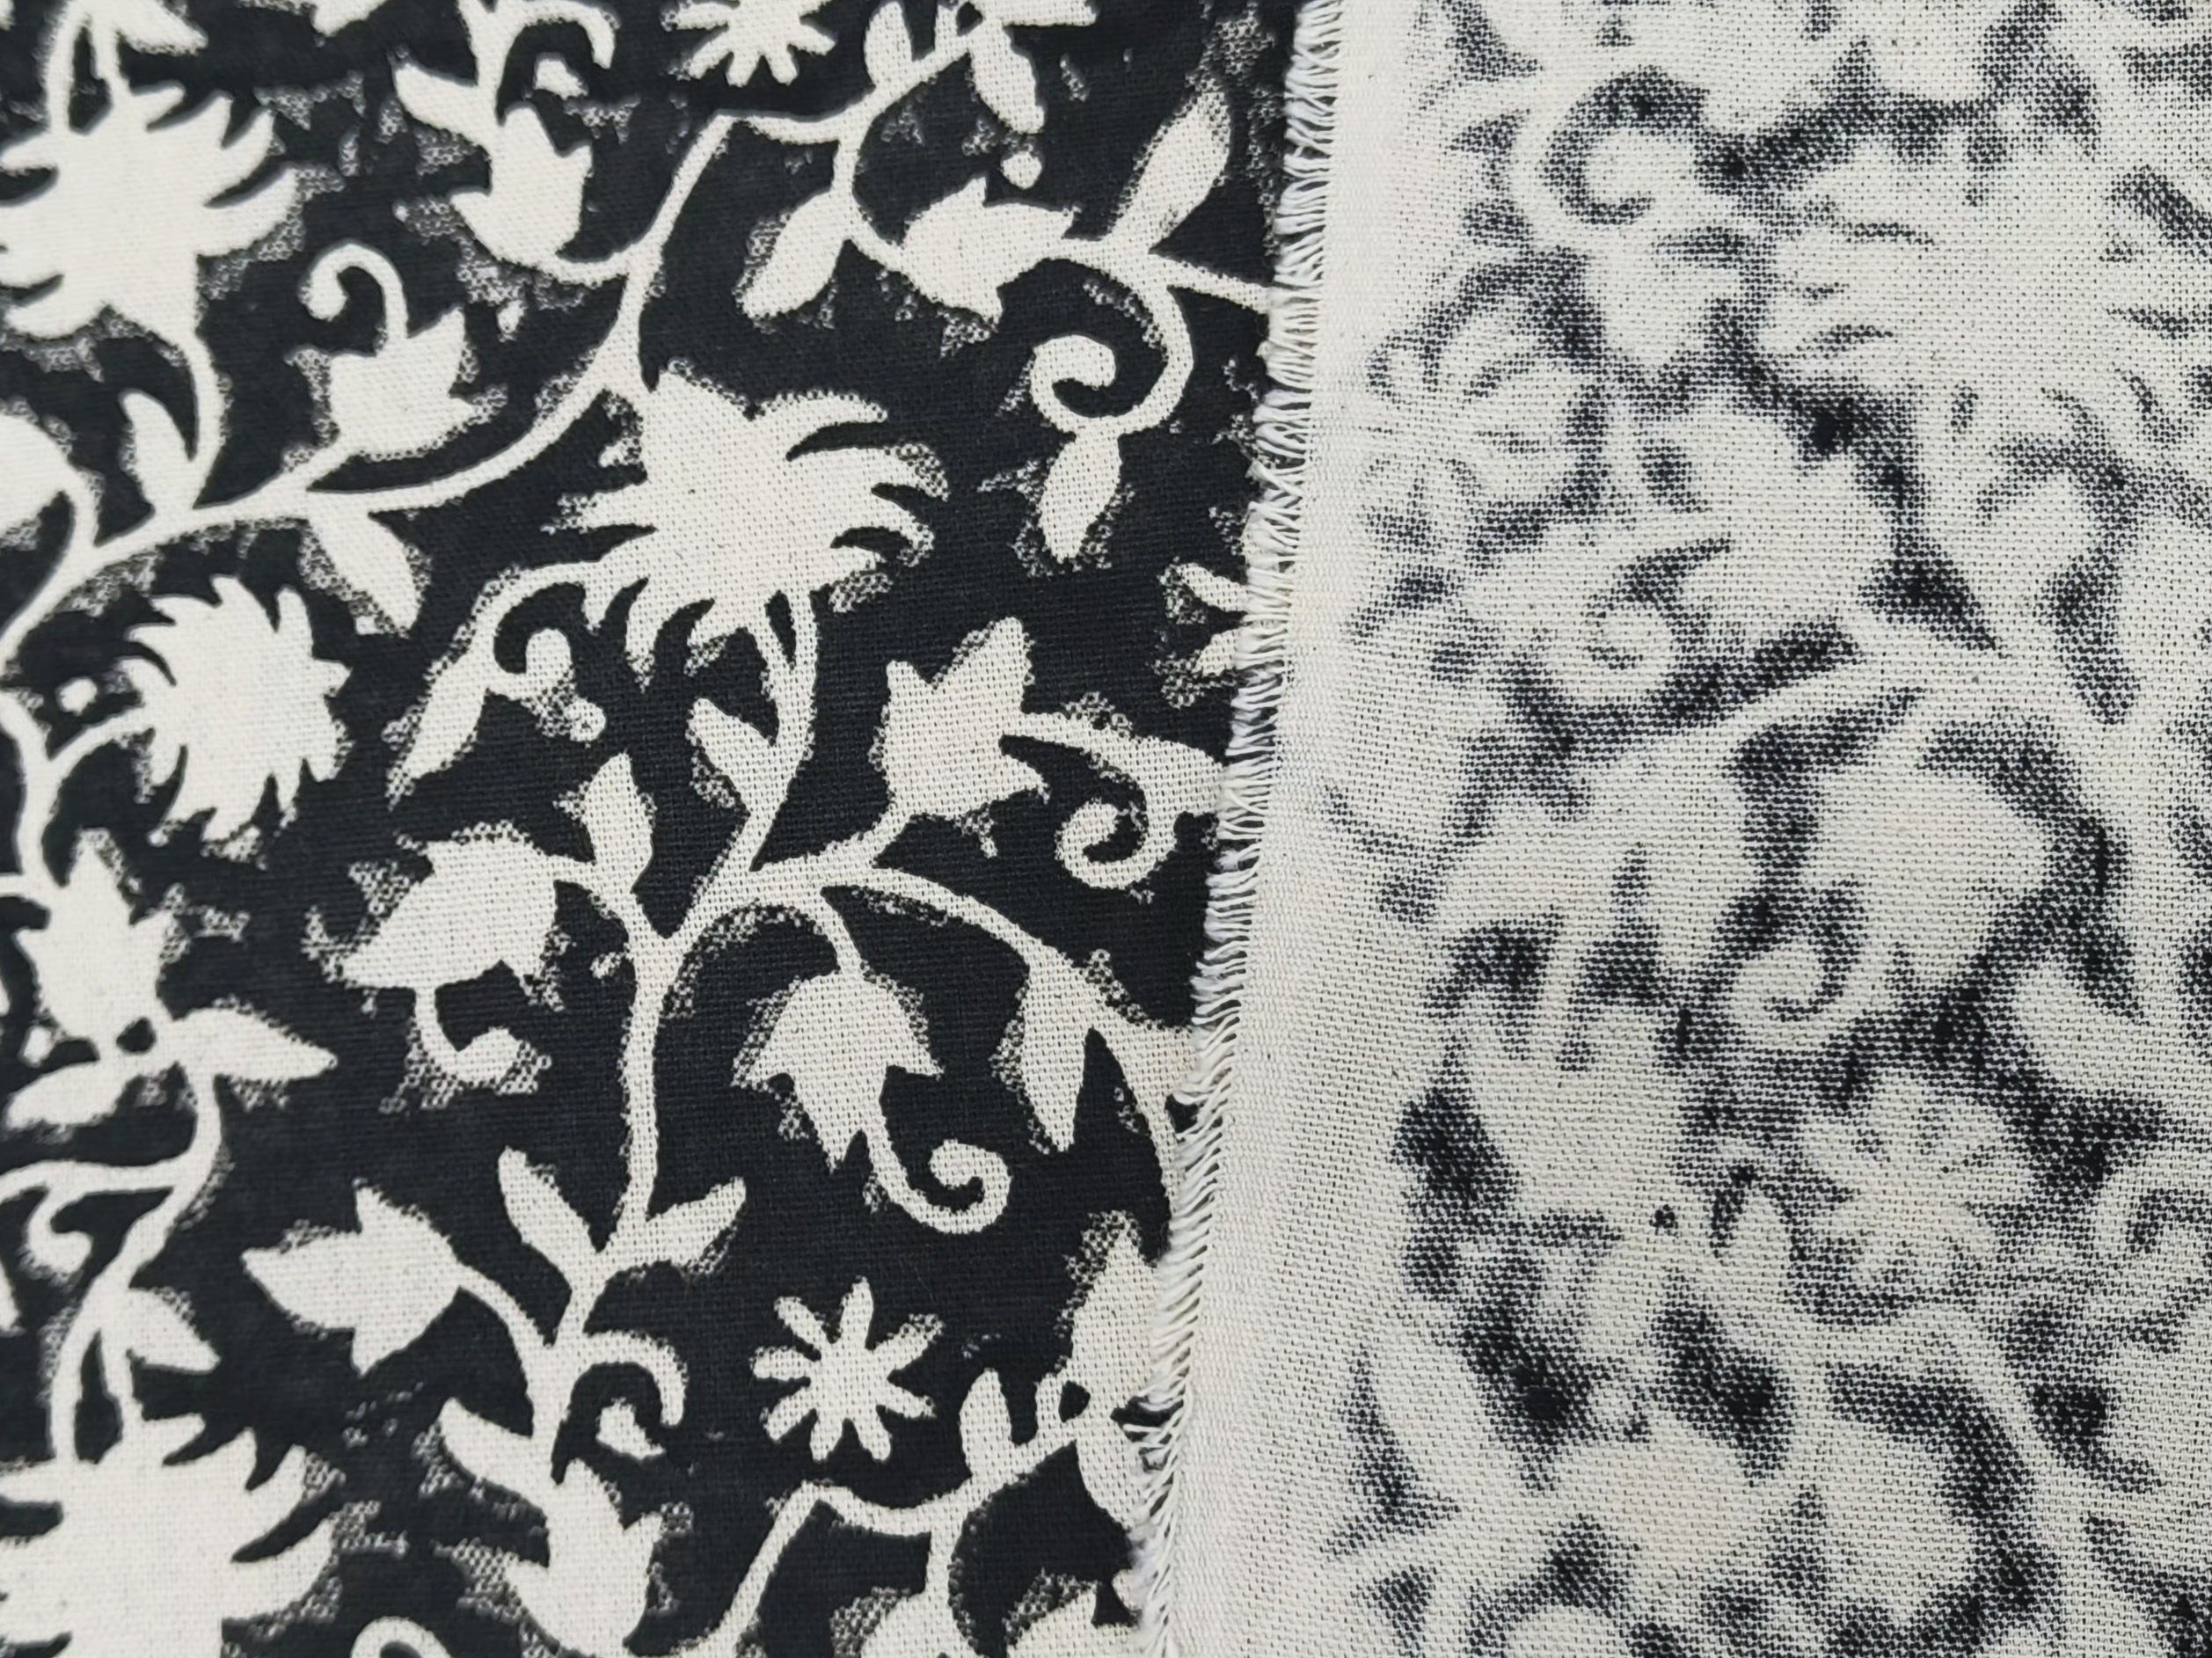 Block Print Linen Fabric, Zelly Fish Black  Hand Block Print Duck Canvas Linen  Heavy Weight Linen Fabric  Upholstery Fabric  Fabric By The Yard